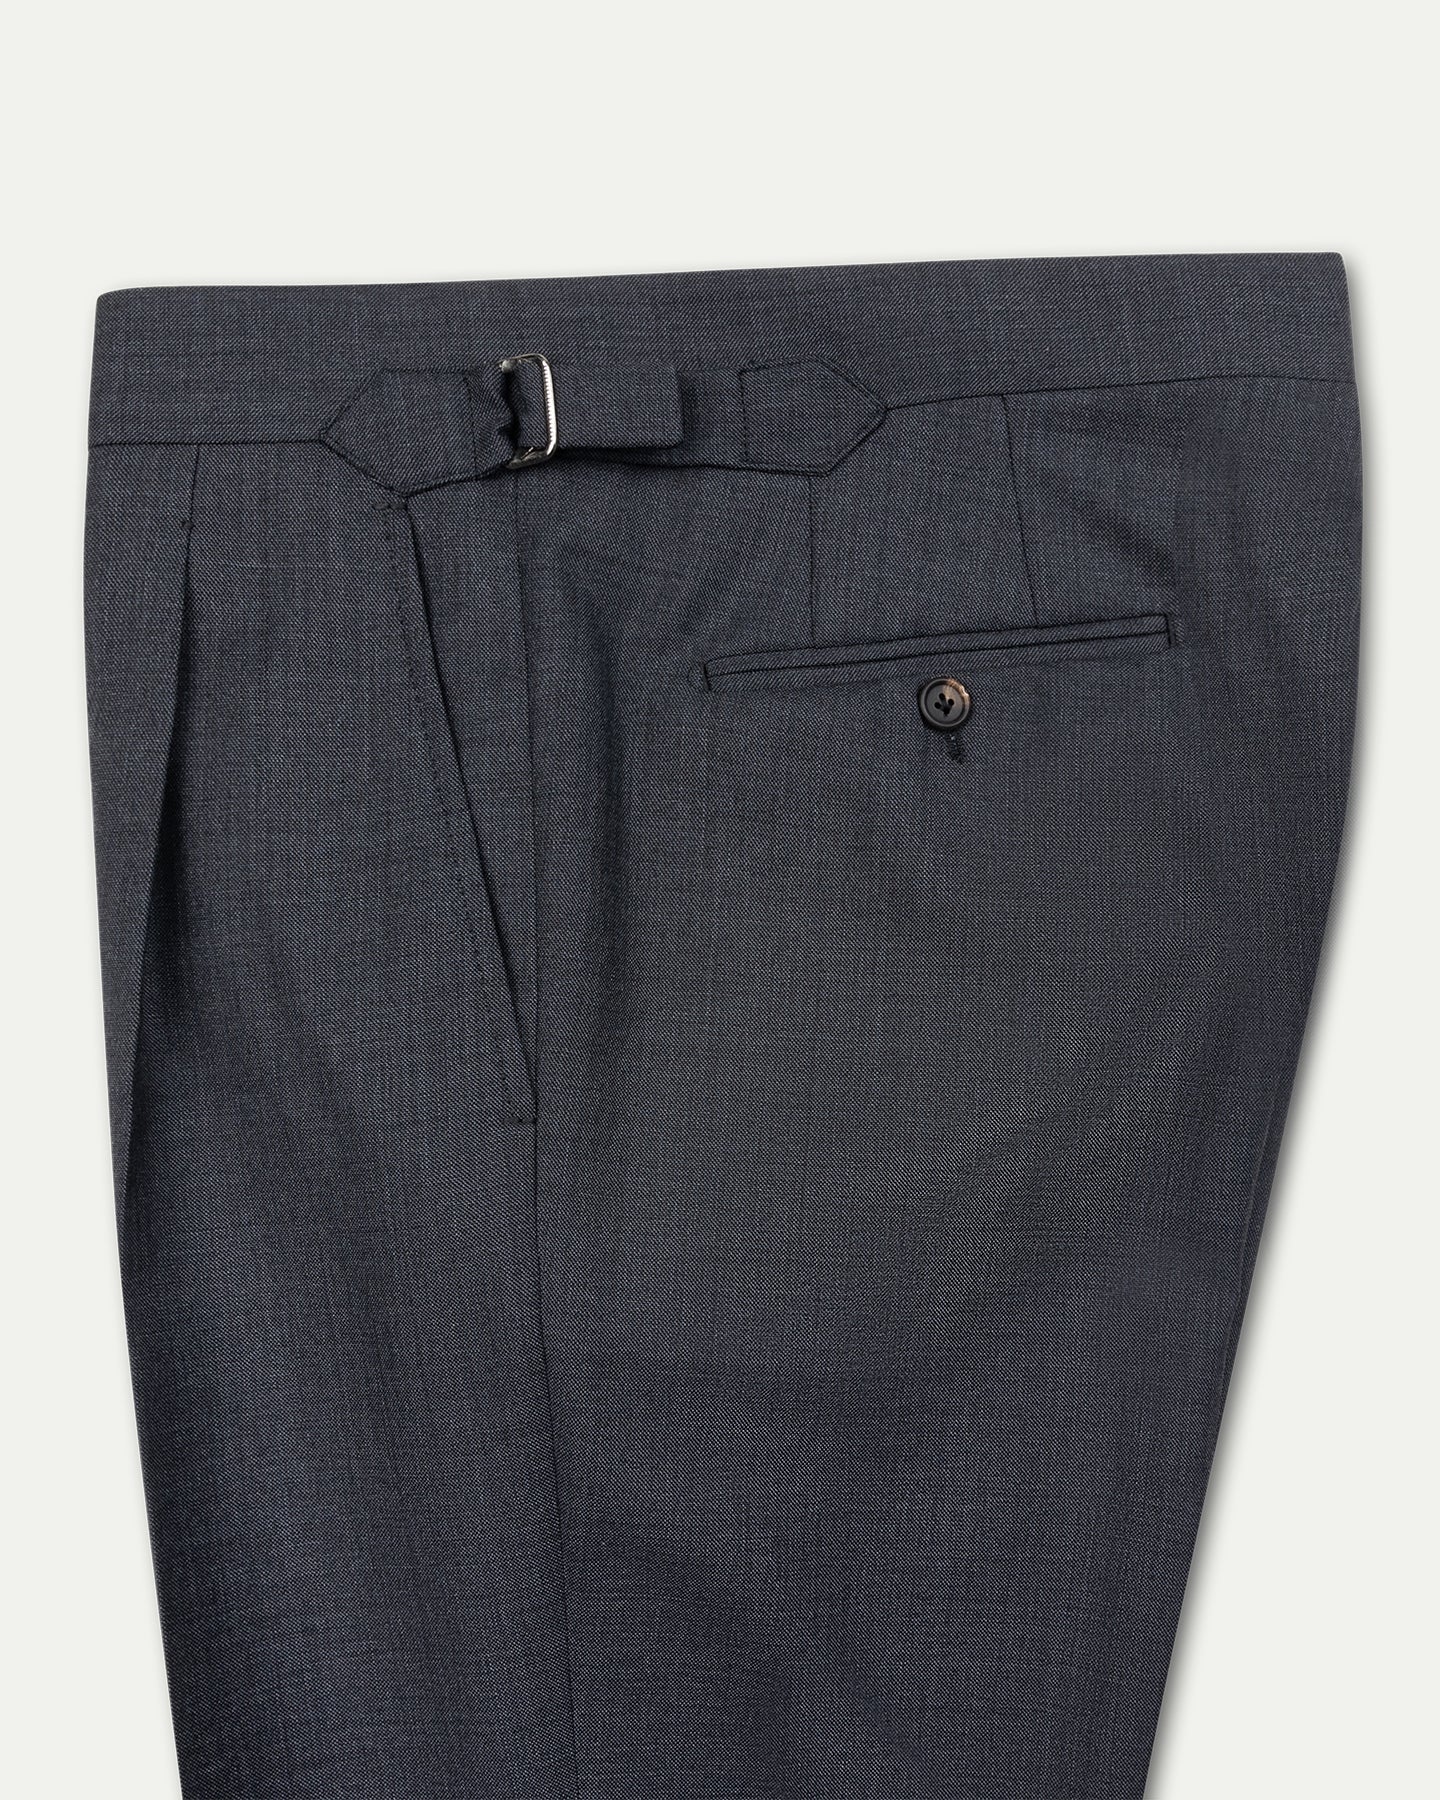 Made-To-Order Mid Grey Sharkskin Suit Trousers